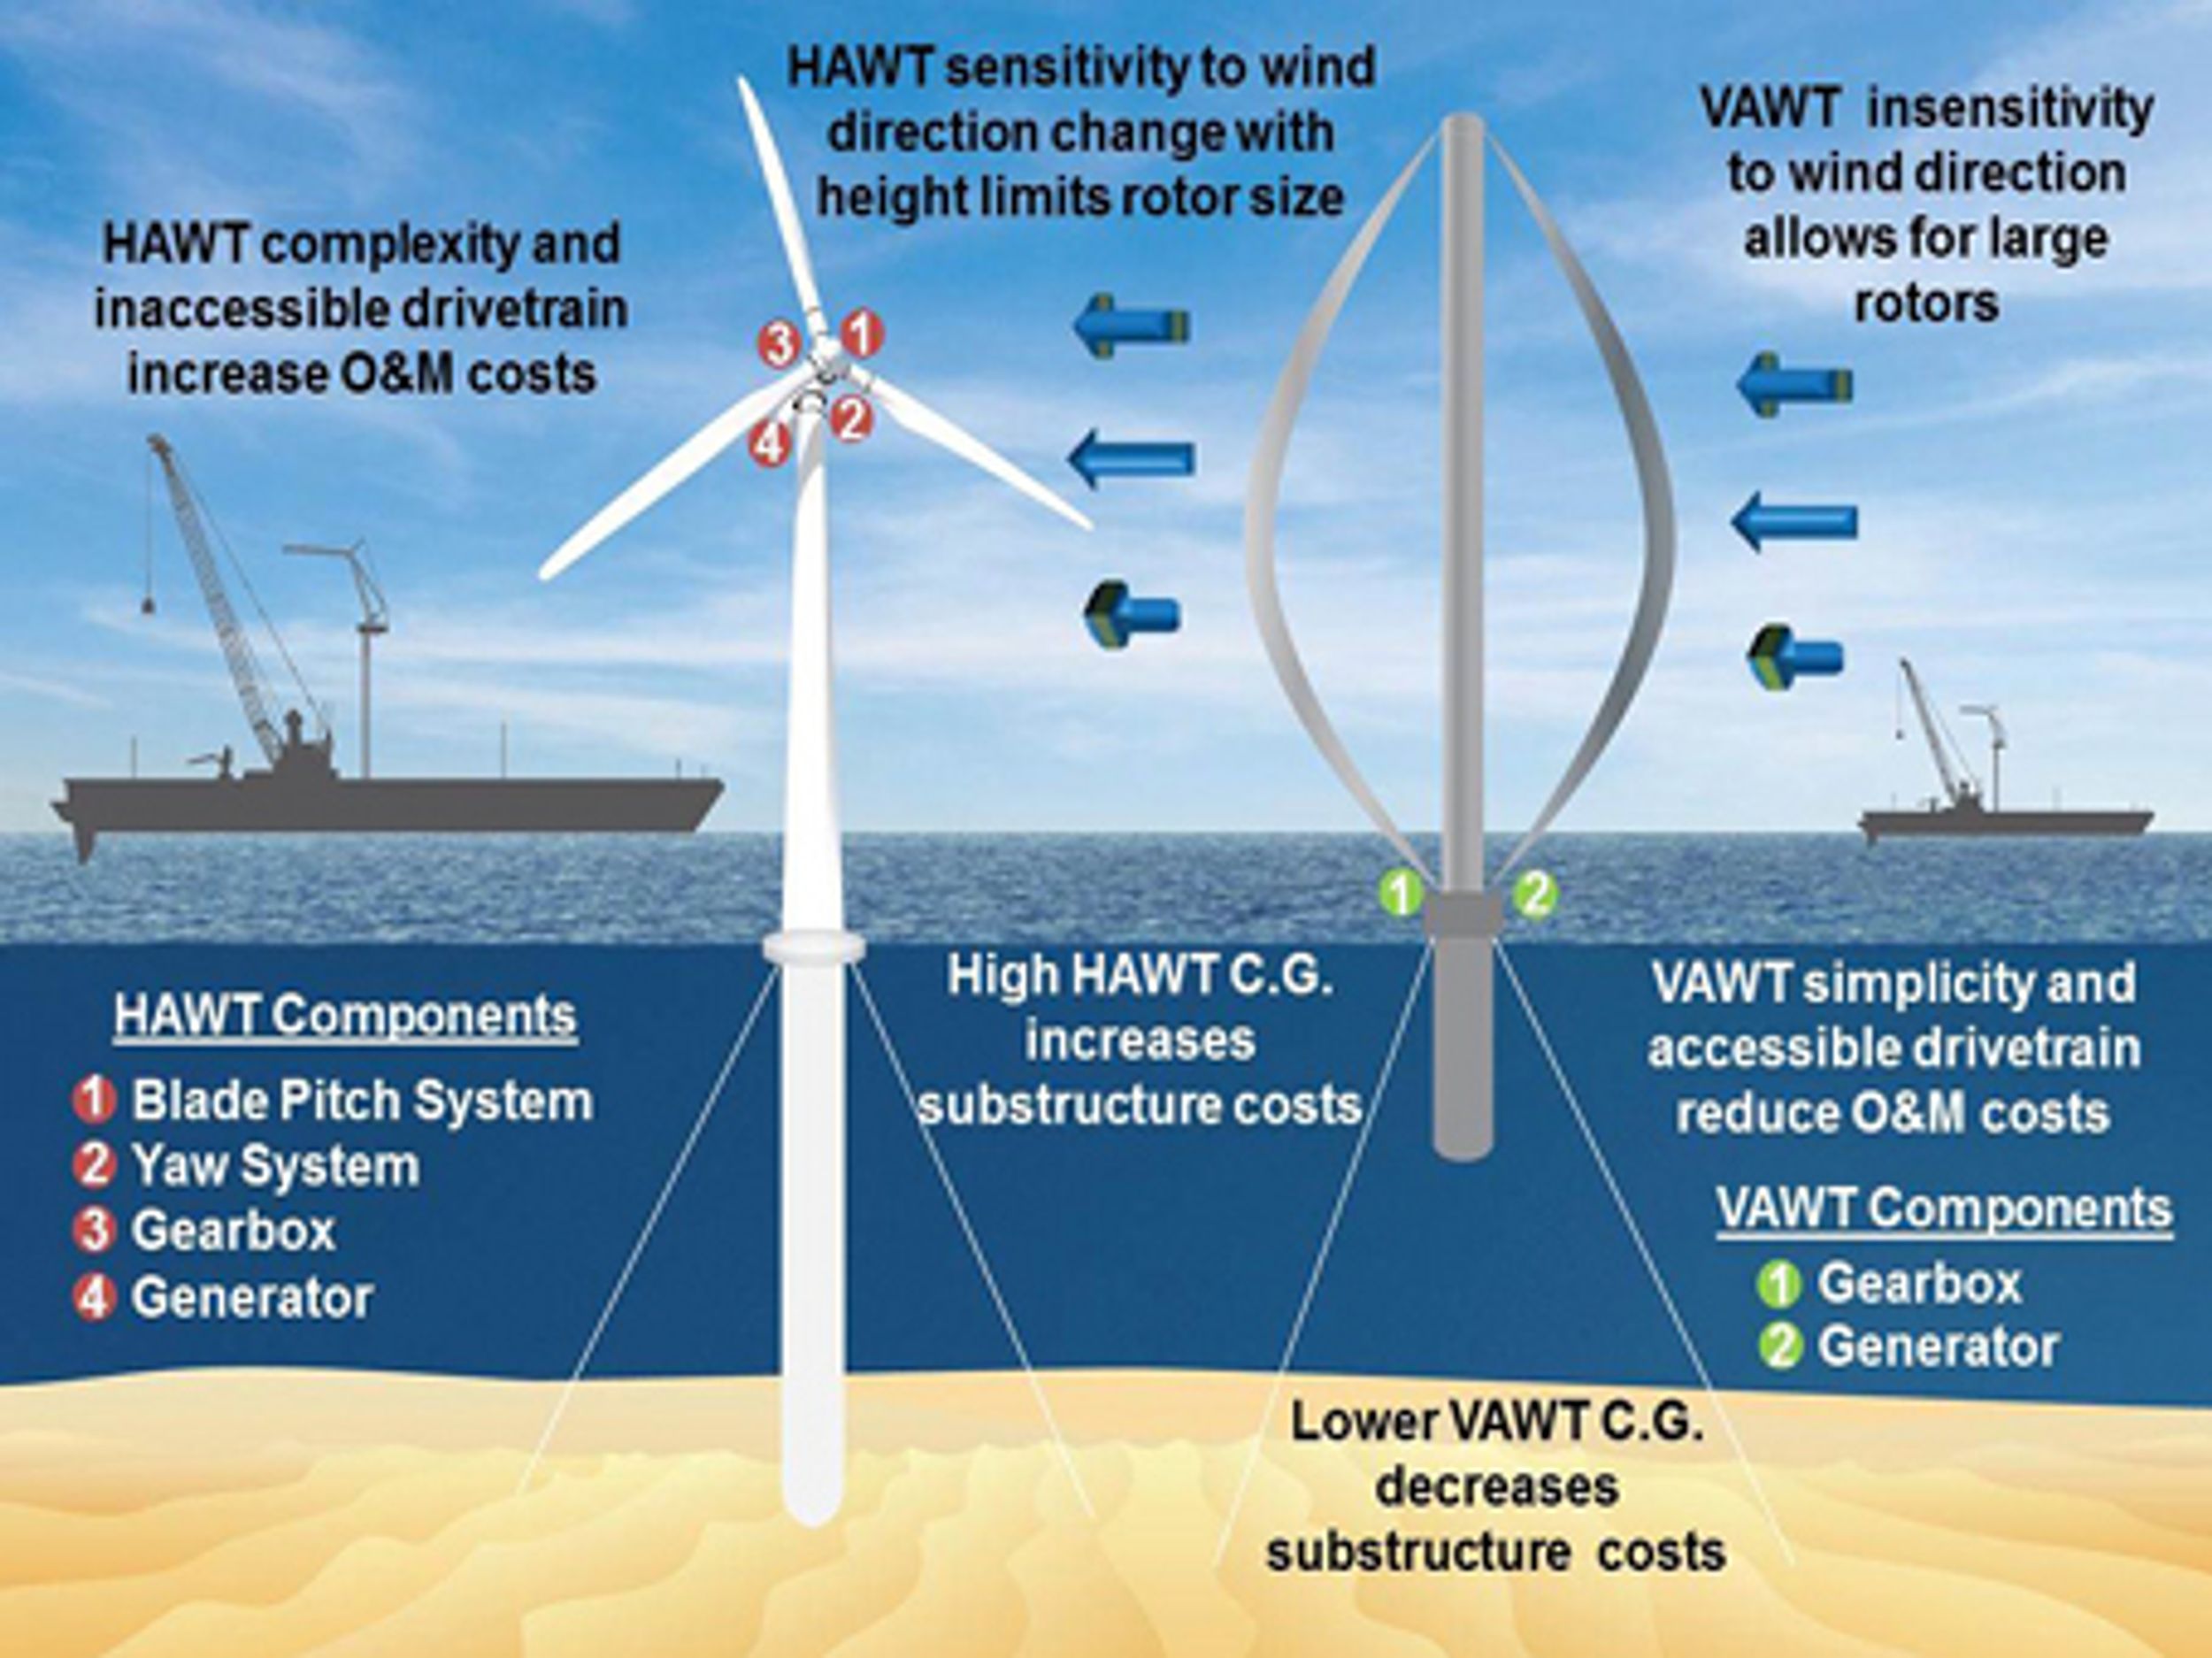 Are Vertical Axis Turbines the Future of Offshore Wind Power?